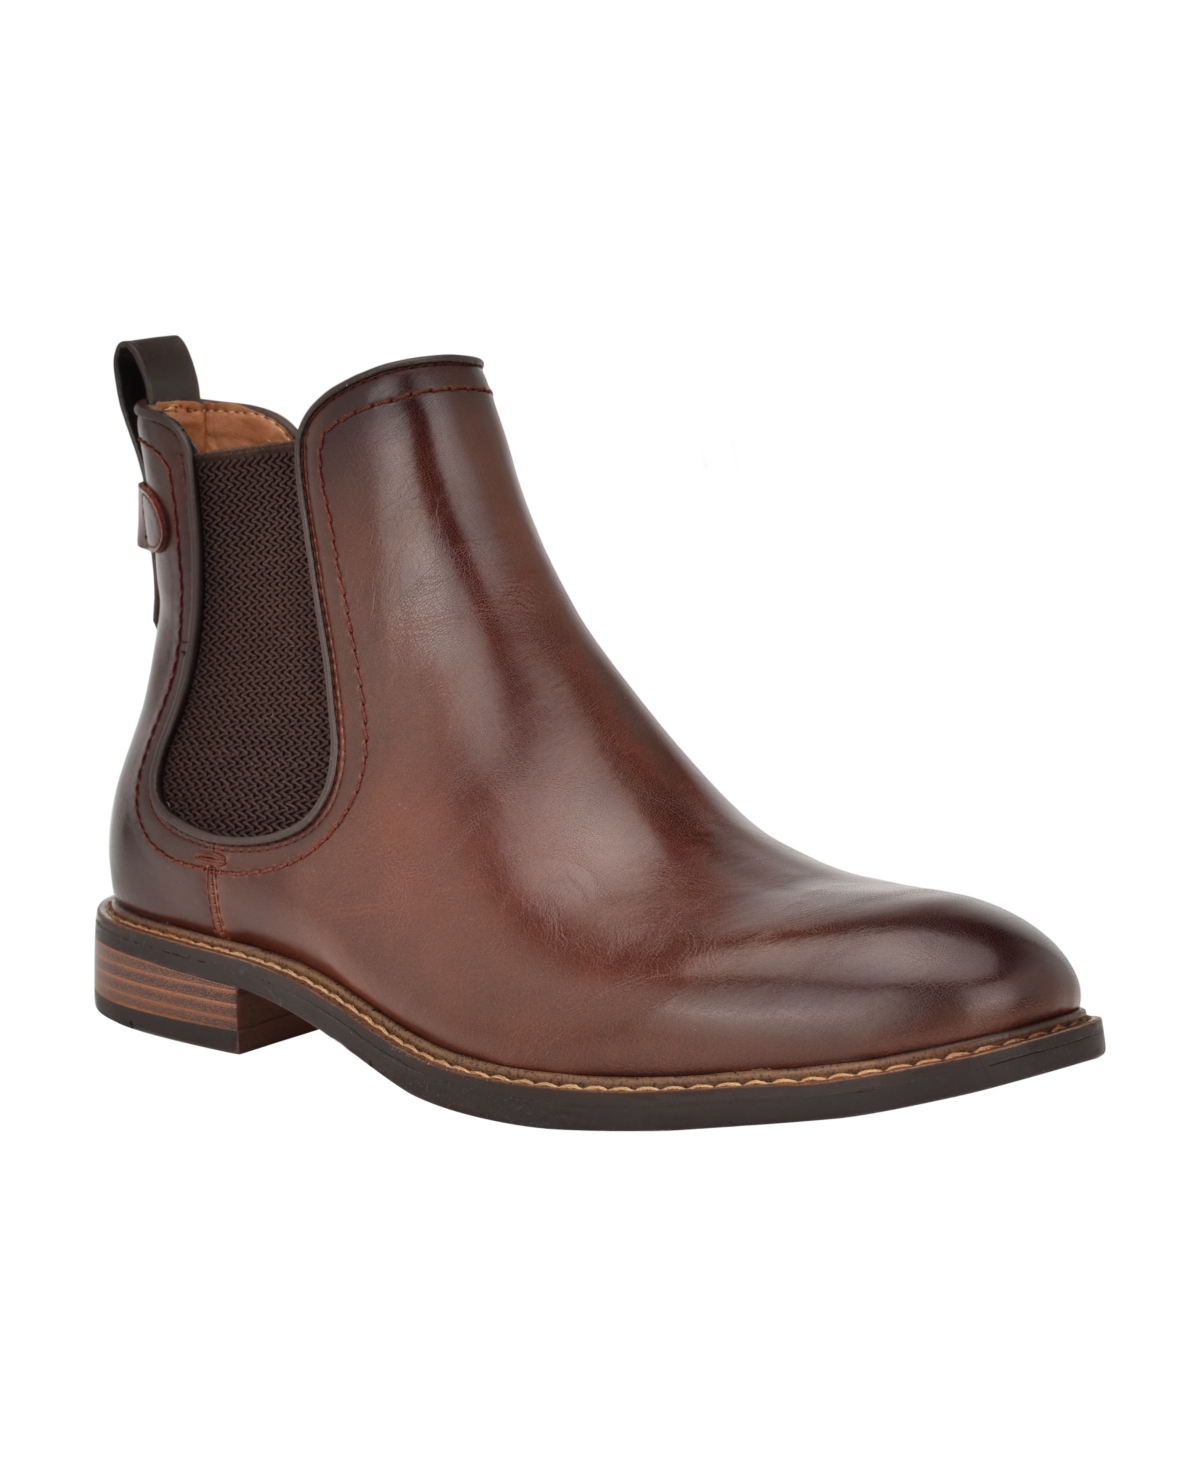 TOMMY HILFIGER MEN'S VITUS PULL ON CHELSEA BOOTS